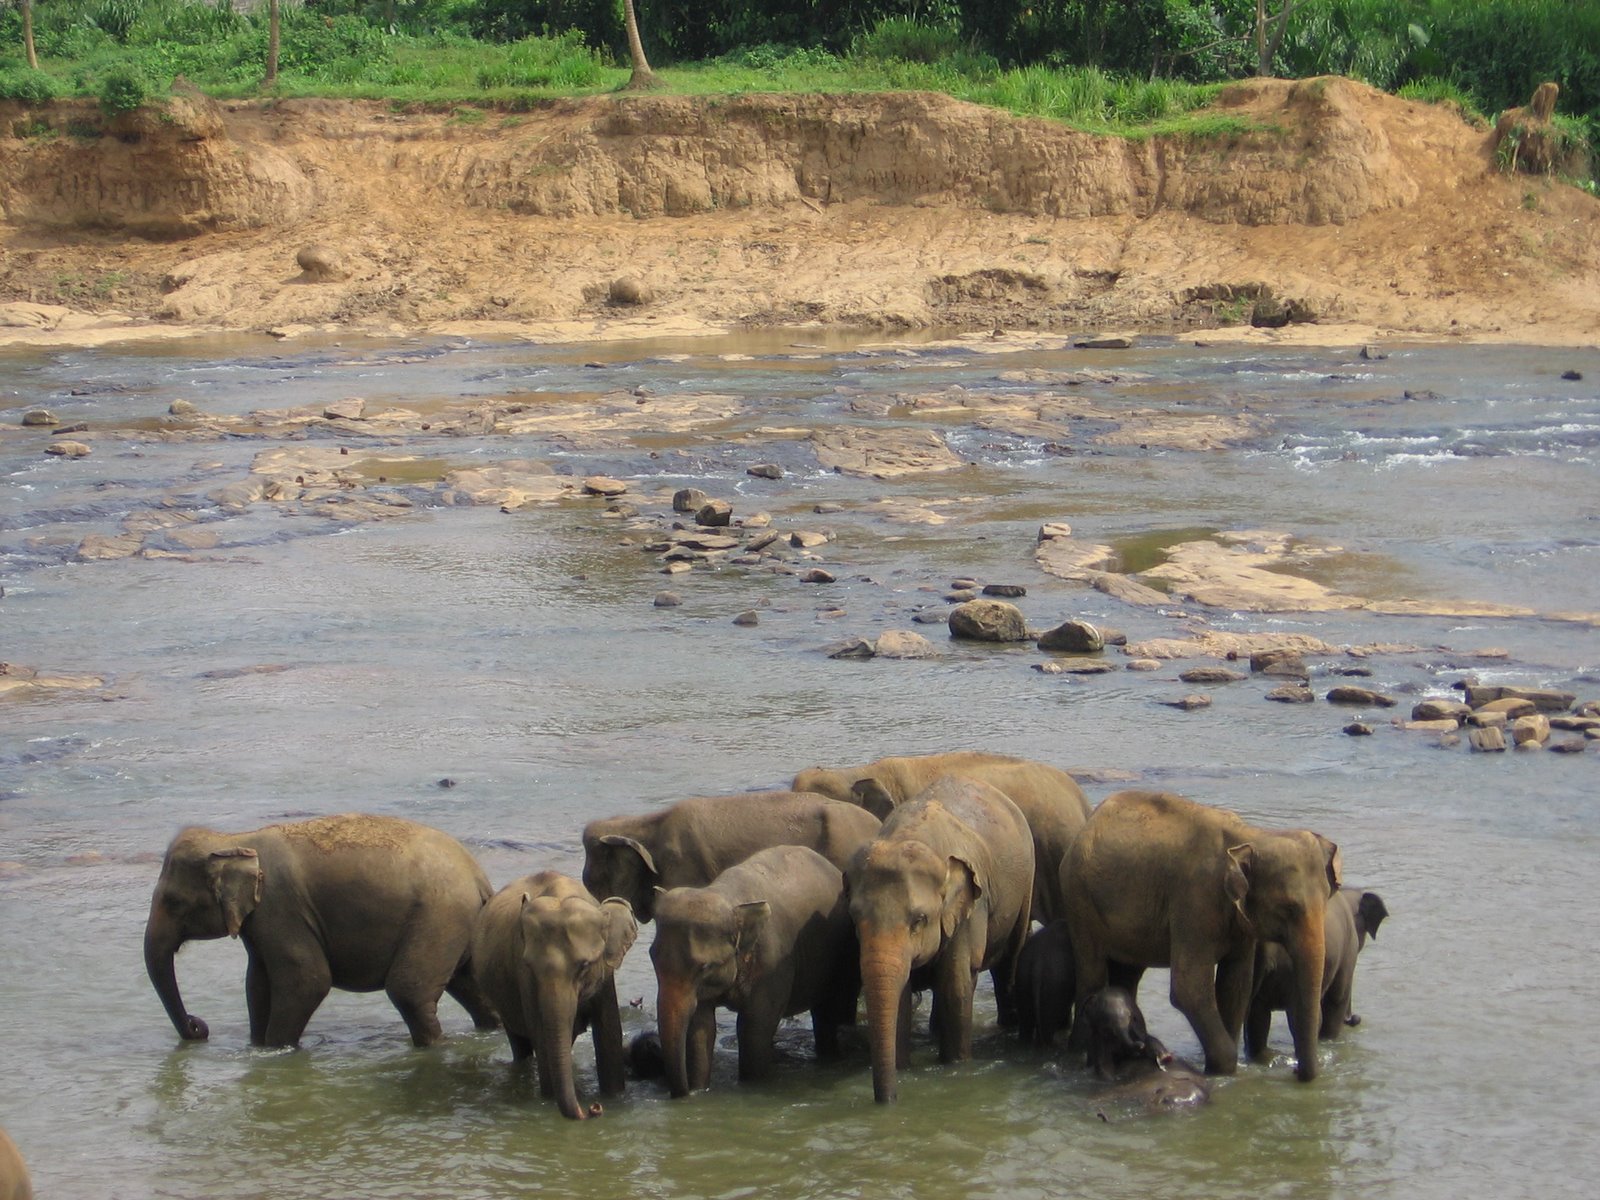 [Group+of+elephants+in+the+river.JPG]